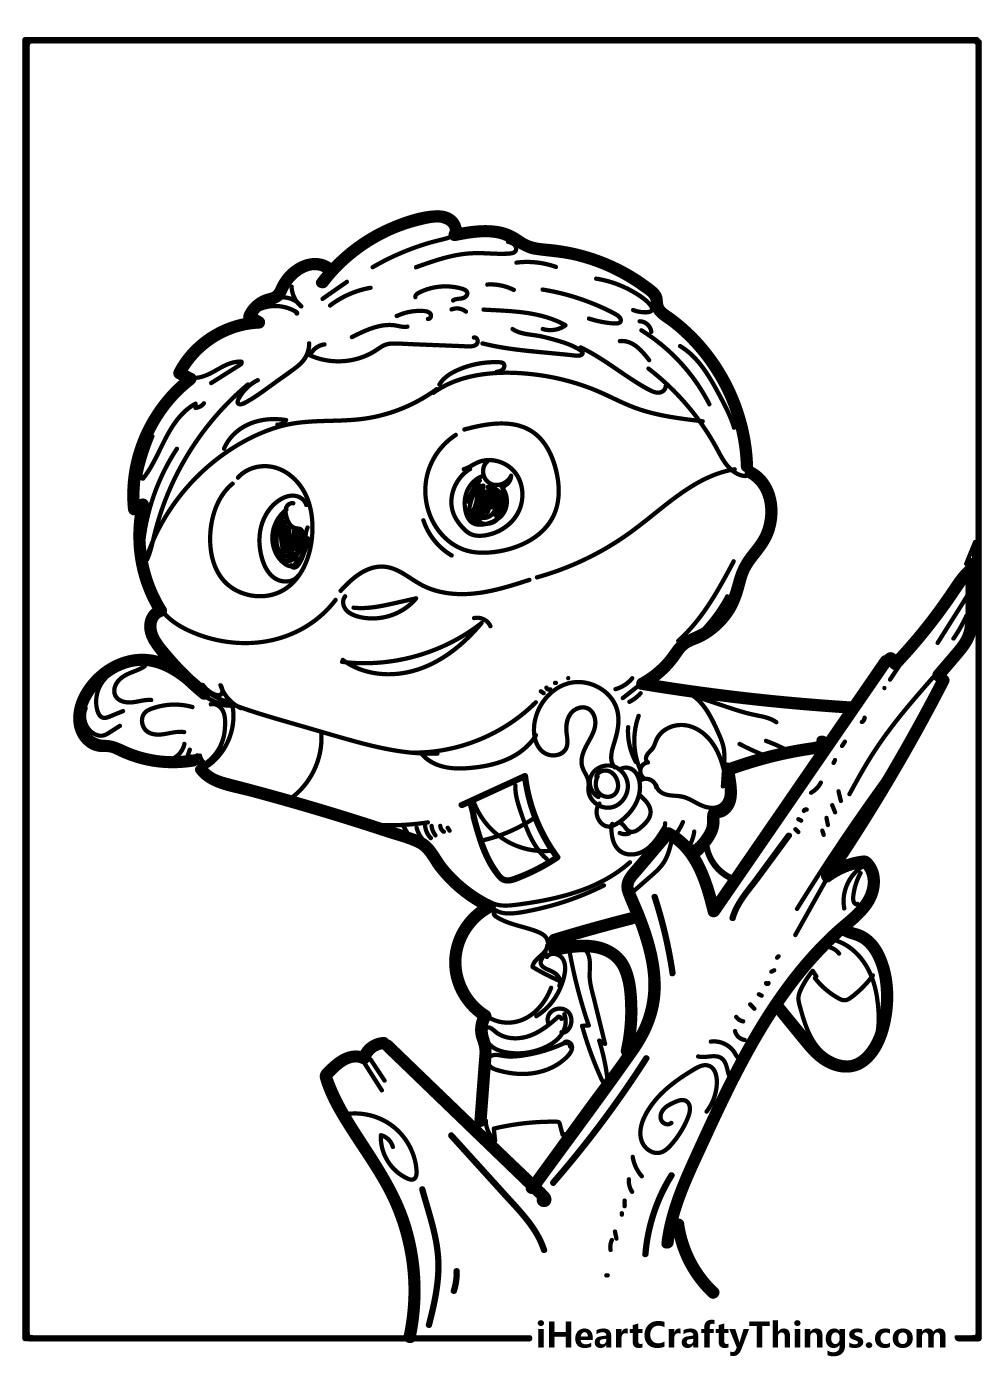 Super Coloring Book for adults free download